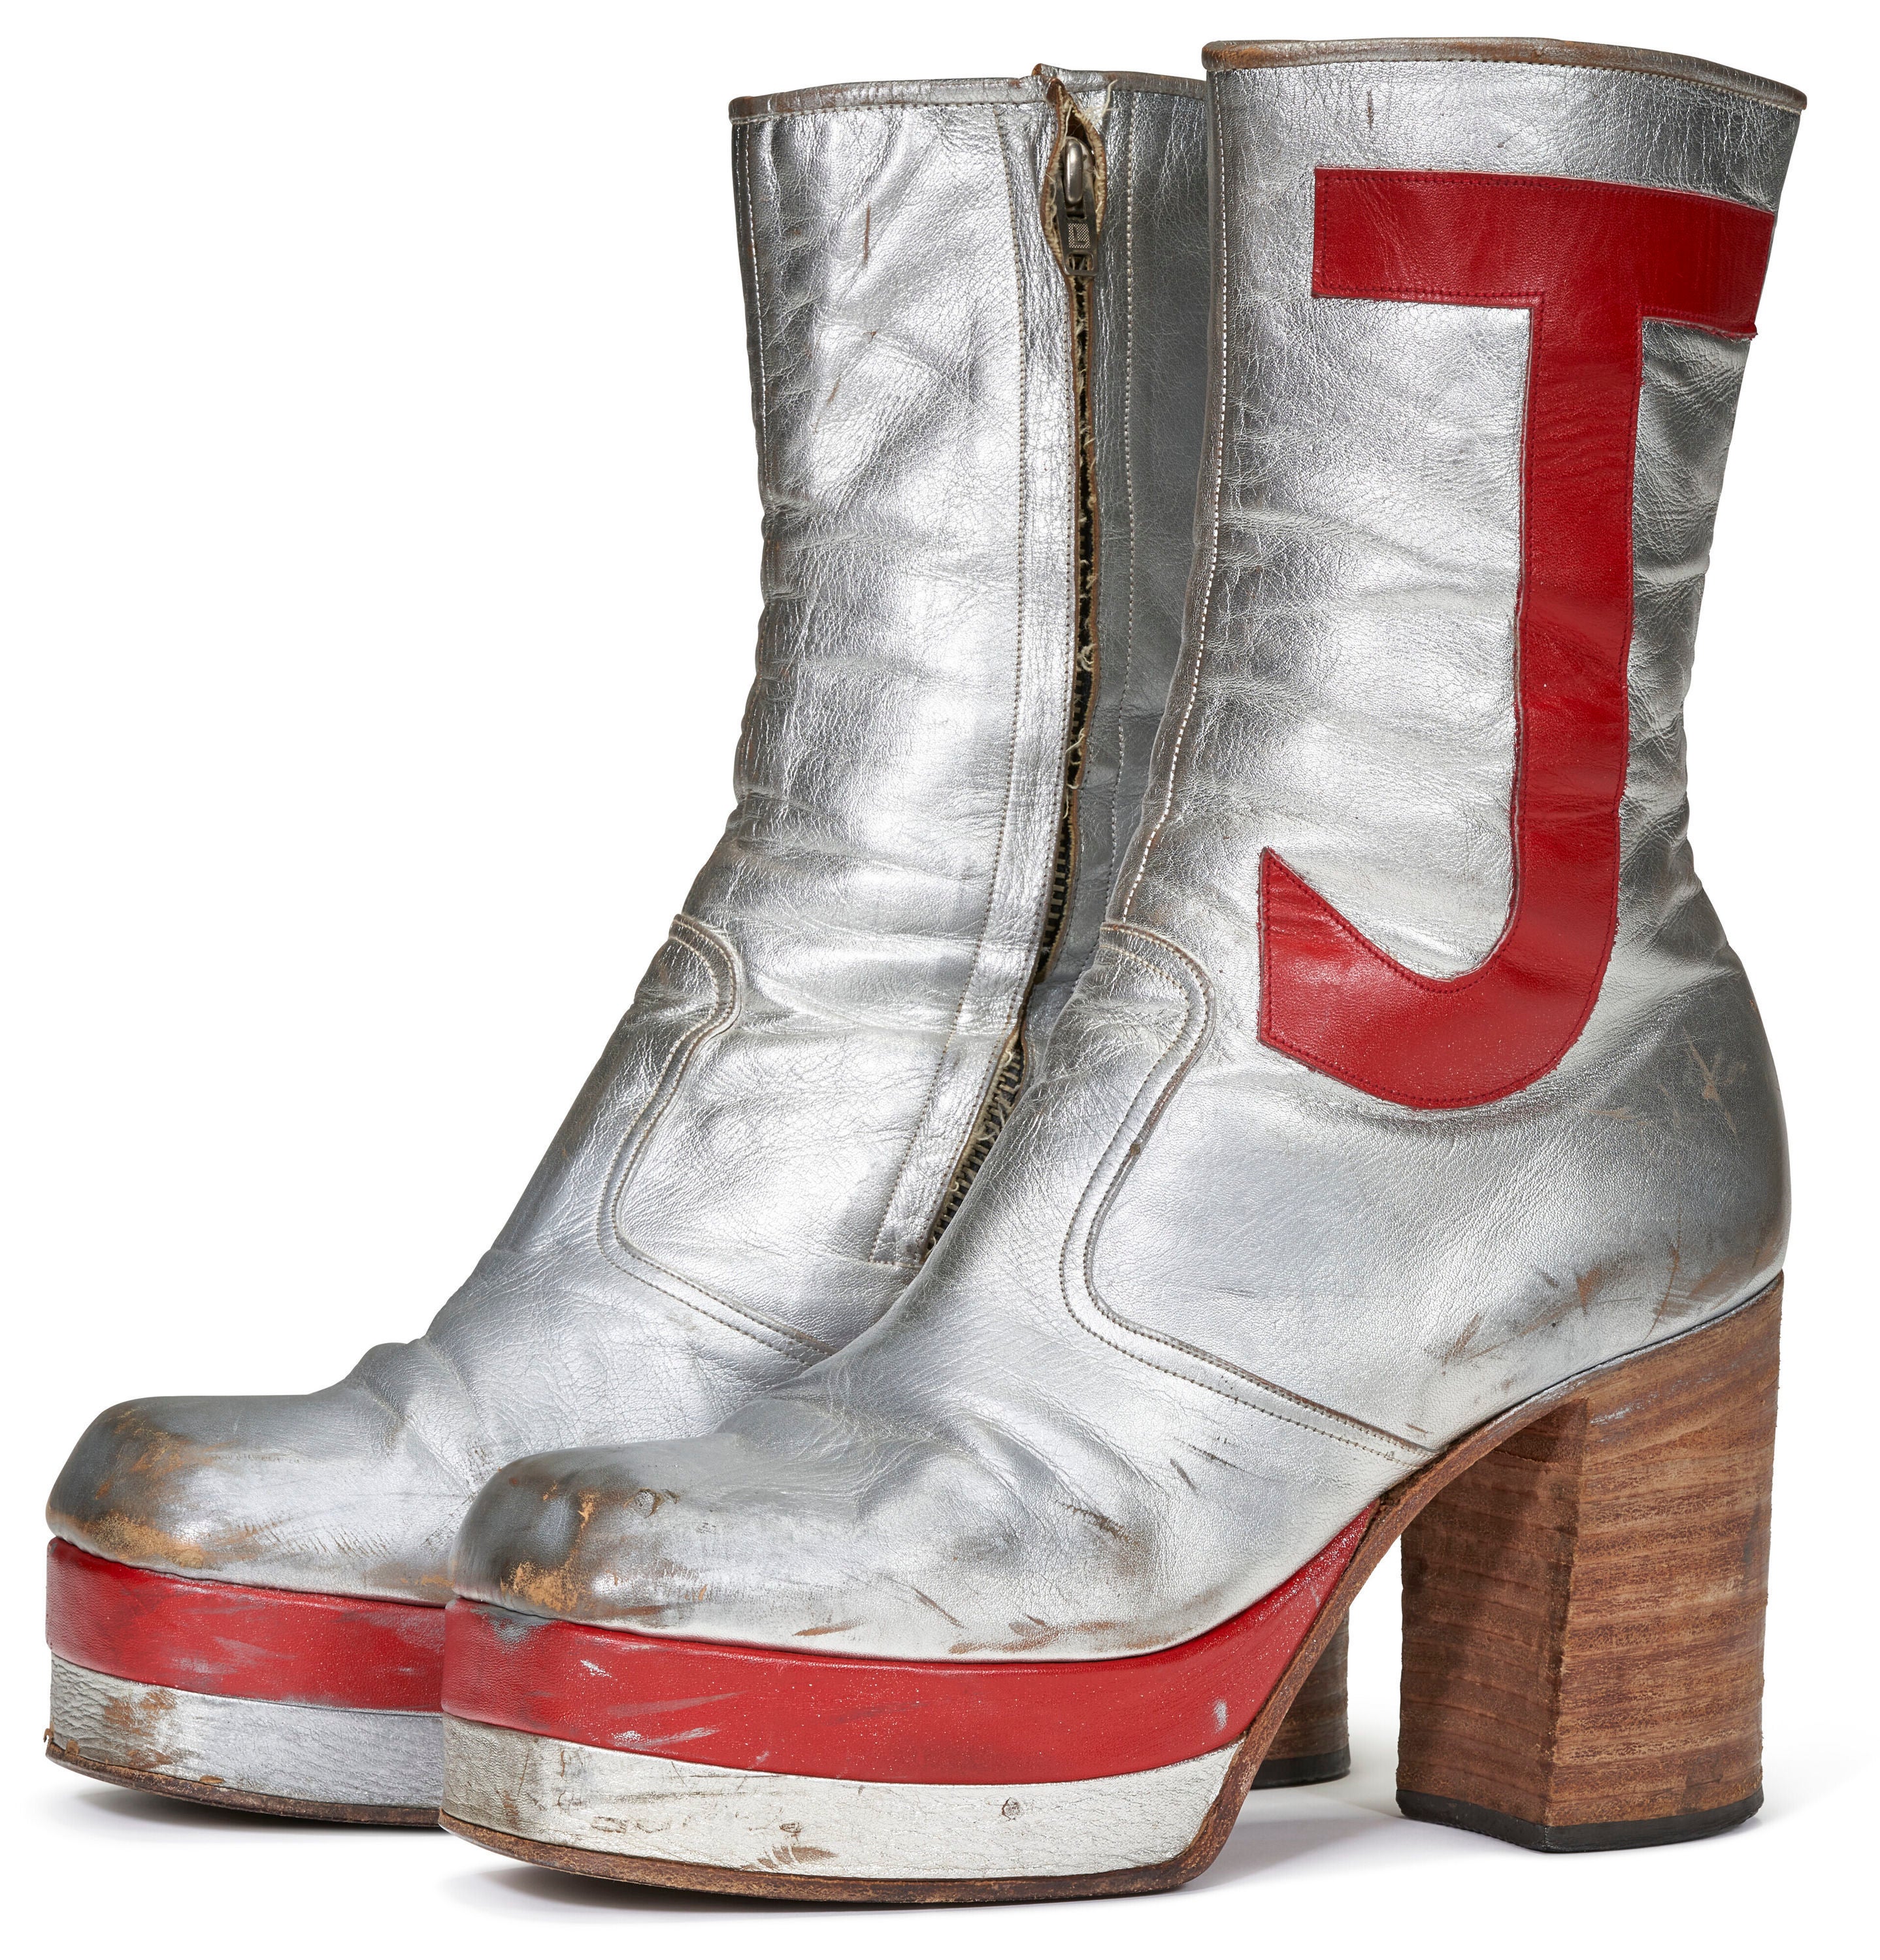 Sir Elton John ’s silver leather platform boots, embroidered in bright red with the letters EJ, will go up for auction with an estimated price of $5,000 to $10,000 (£3,900 to £7,900)